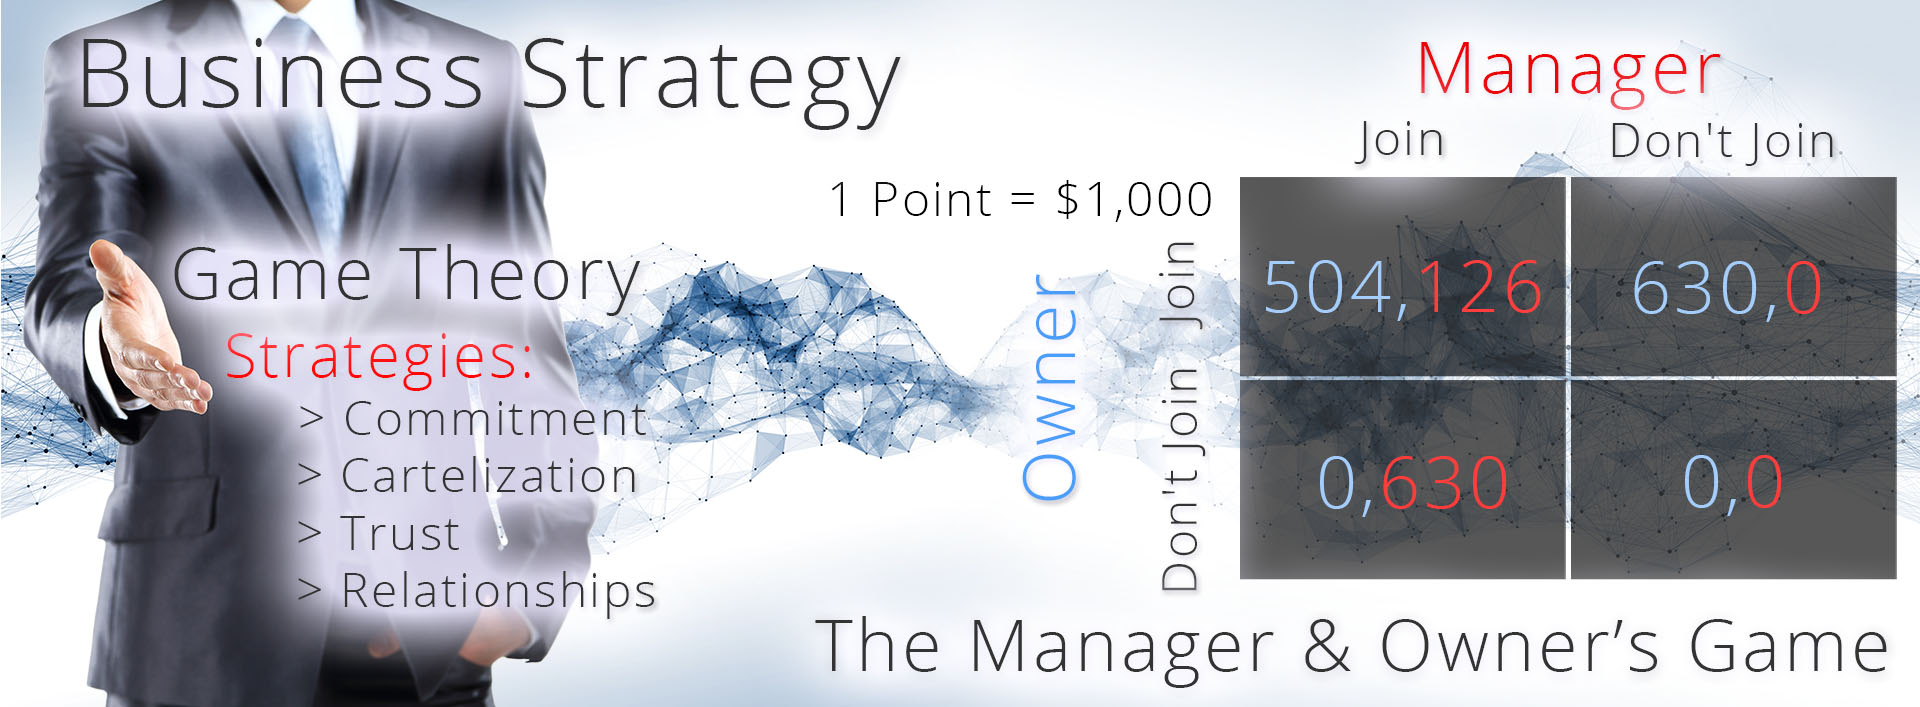 Business-Strategy__The-Manager-&-Owners-Game